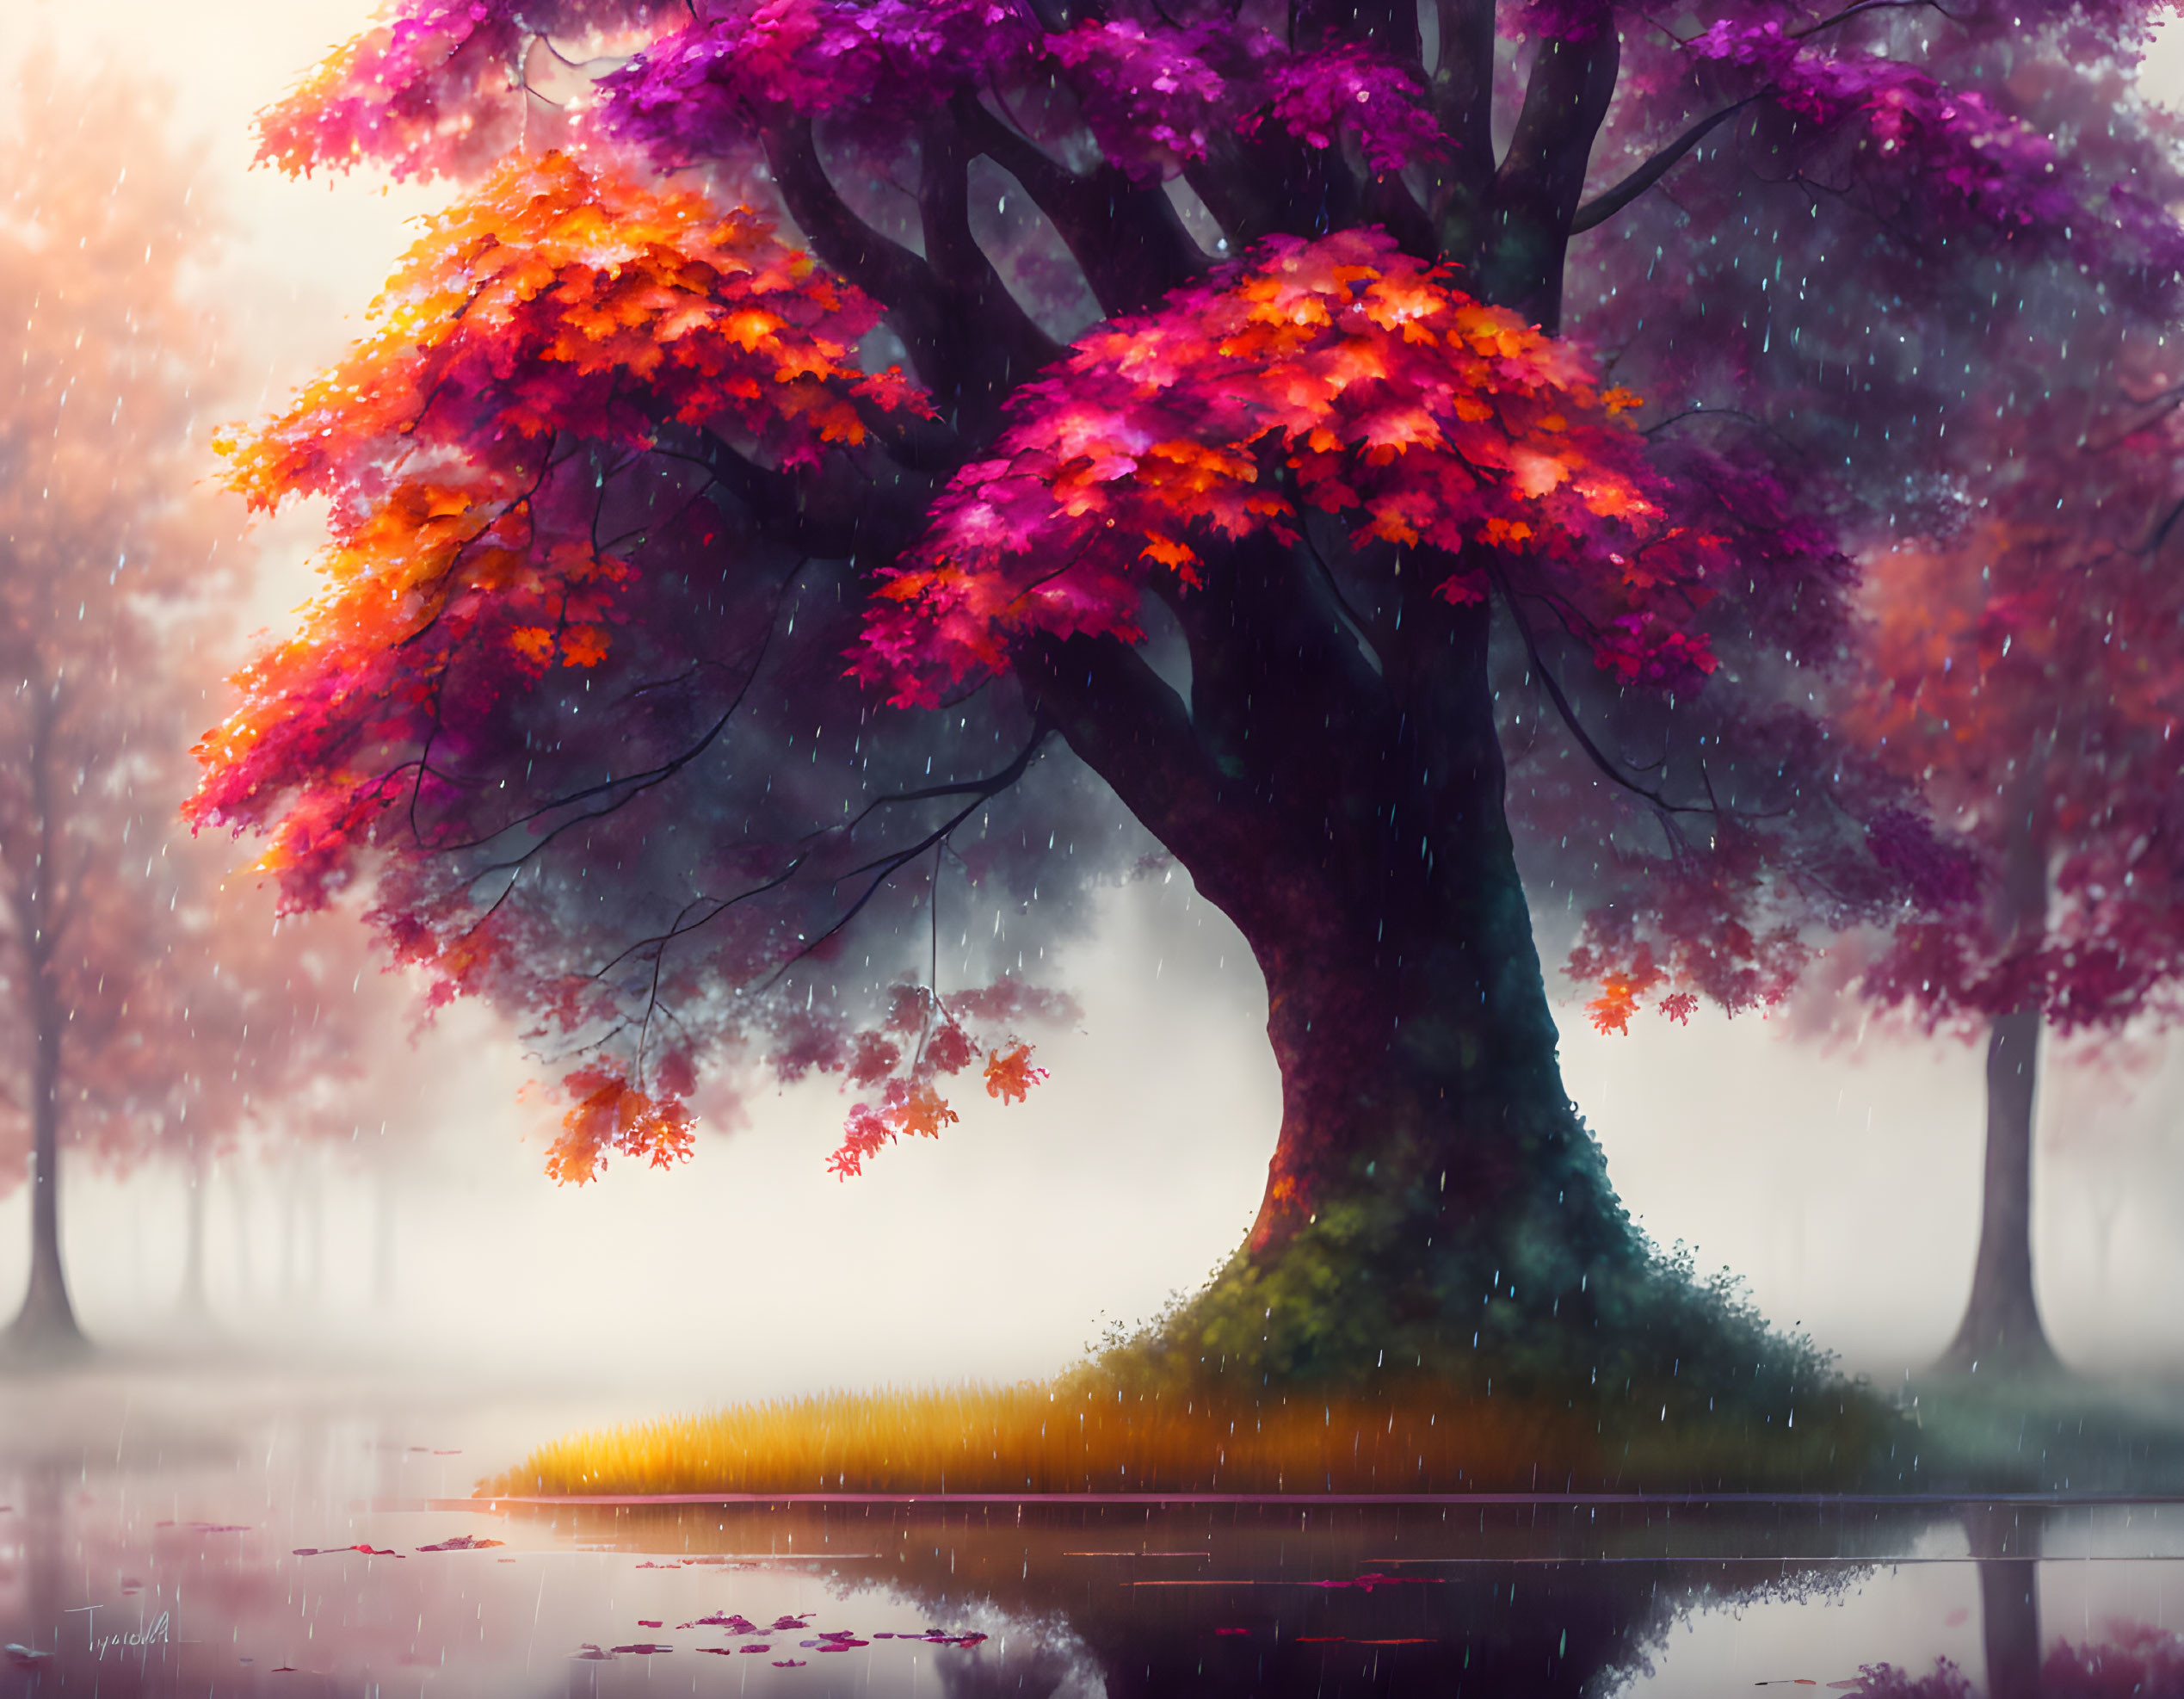 Vibrant tree with red autumn leaves by reflective water in misty setting